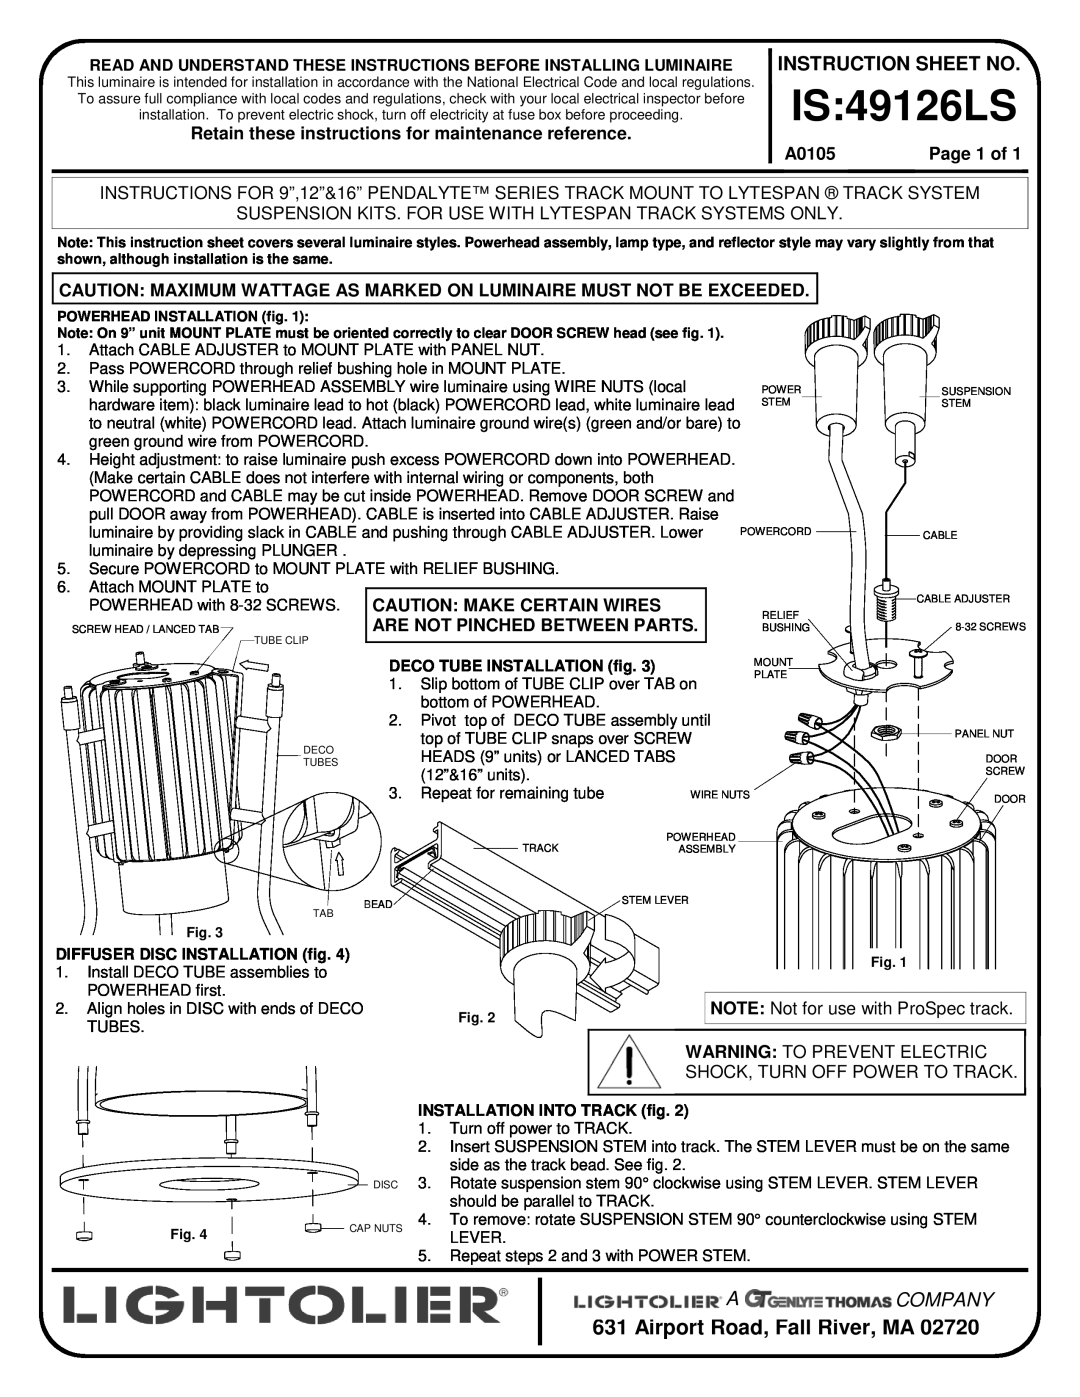 Lightolier IS:49126LS instruction sheet Caution Make Certain Wires, Are Not Pinched Between Parts 